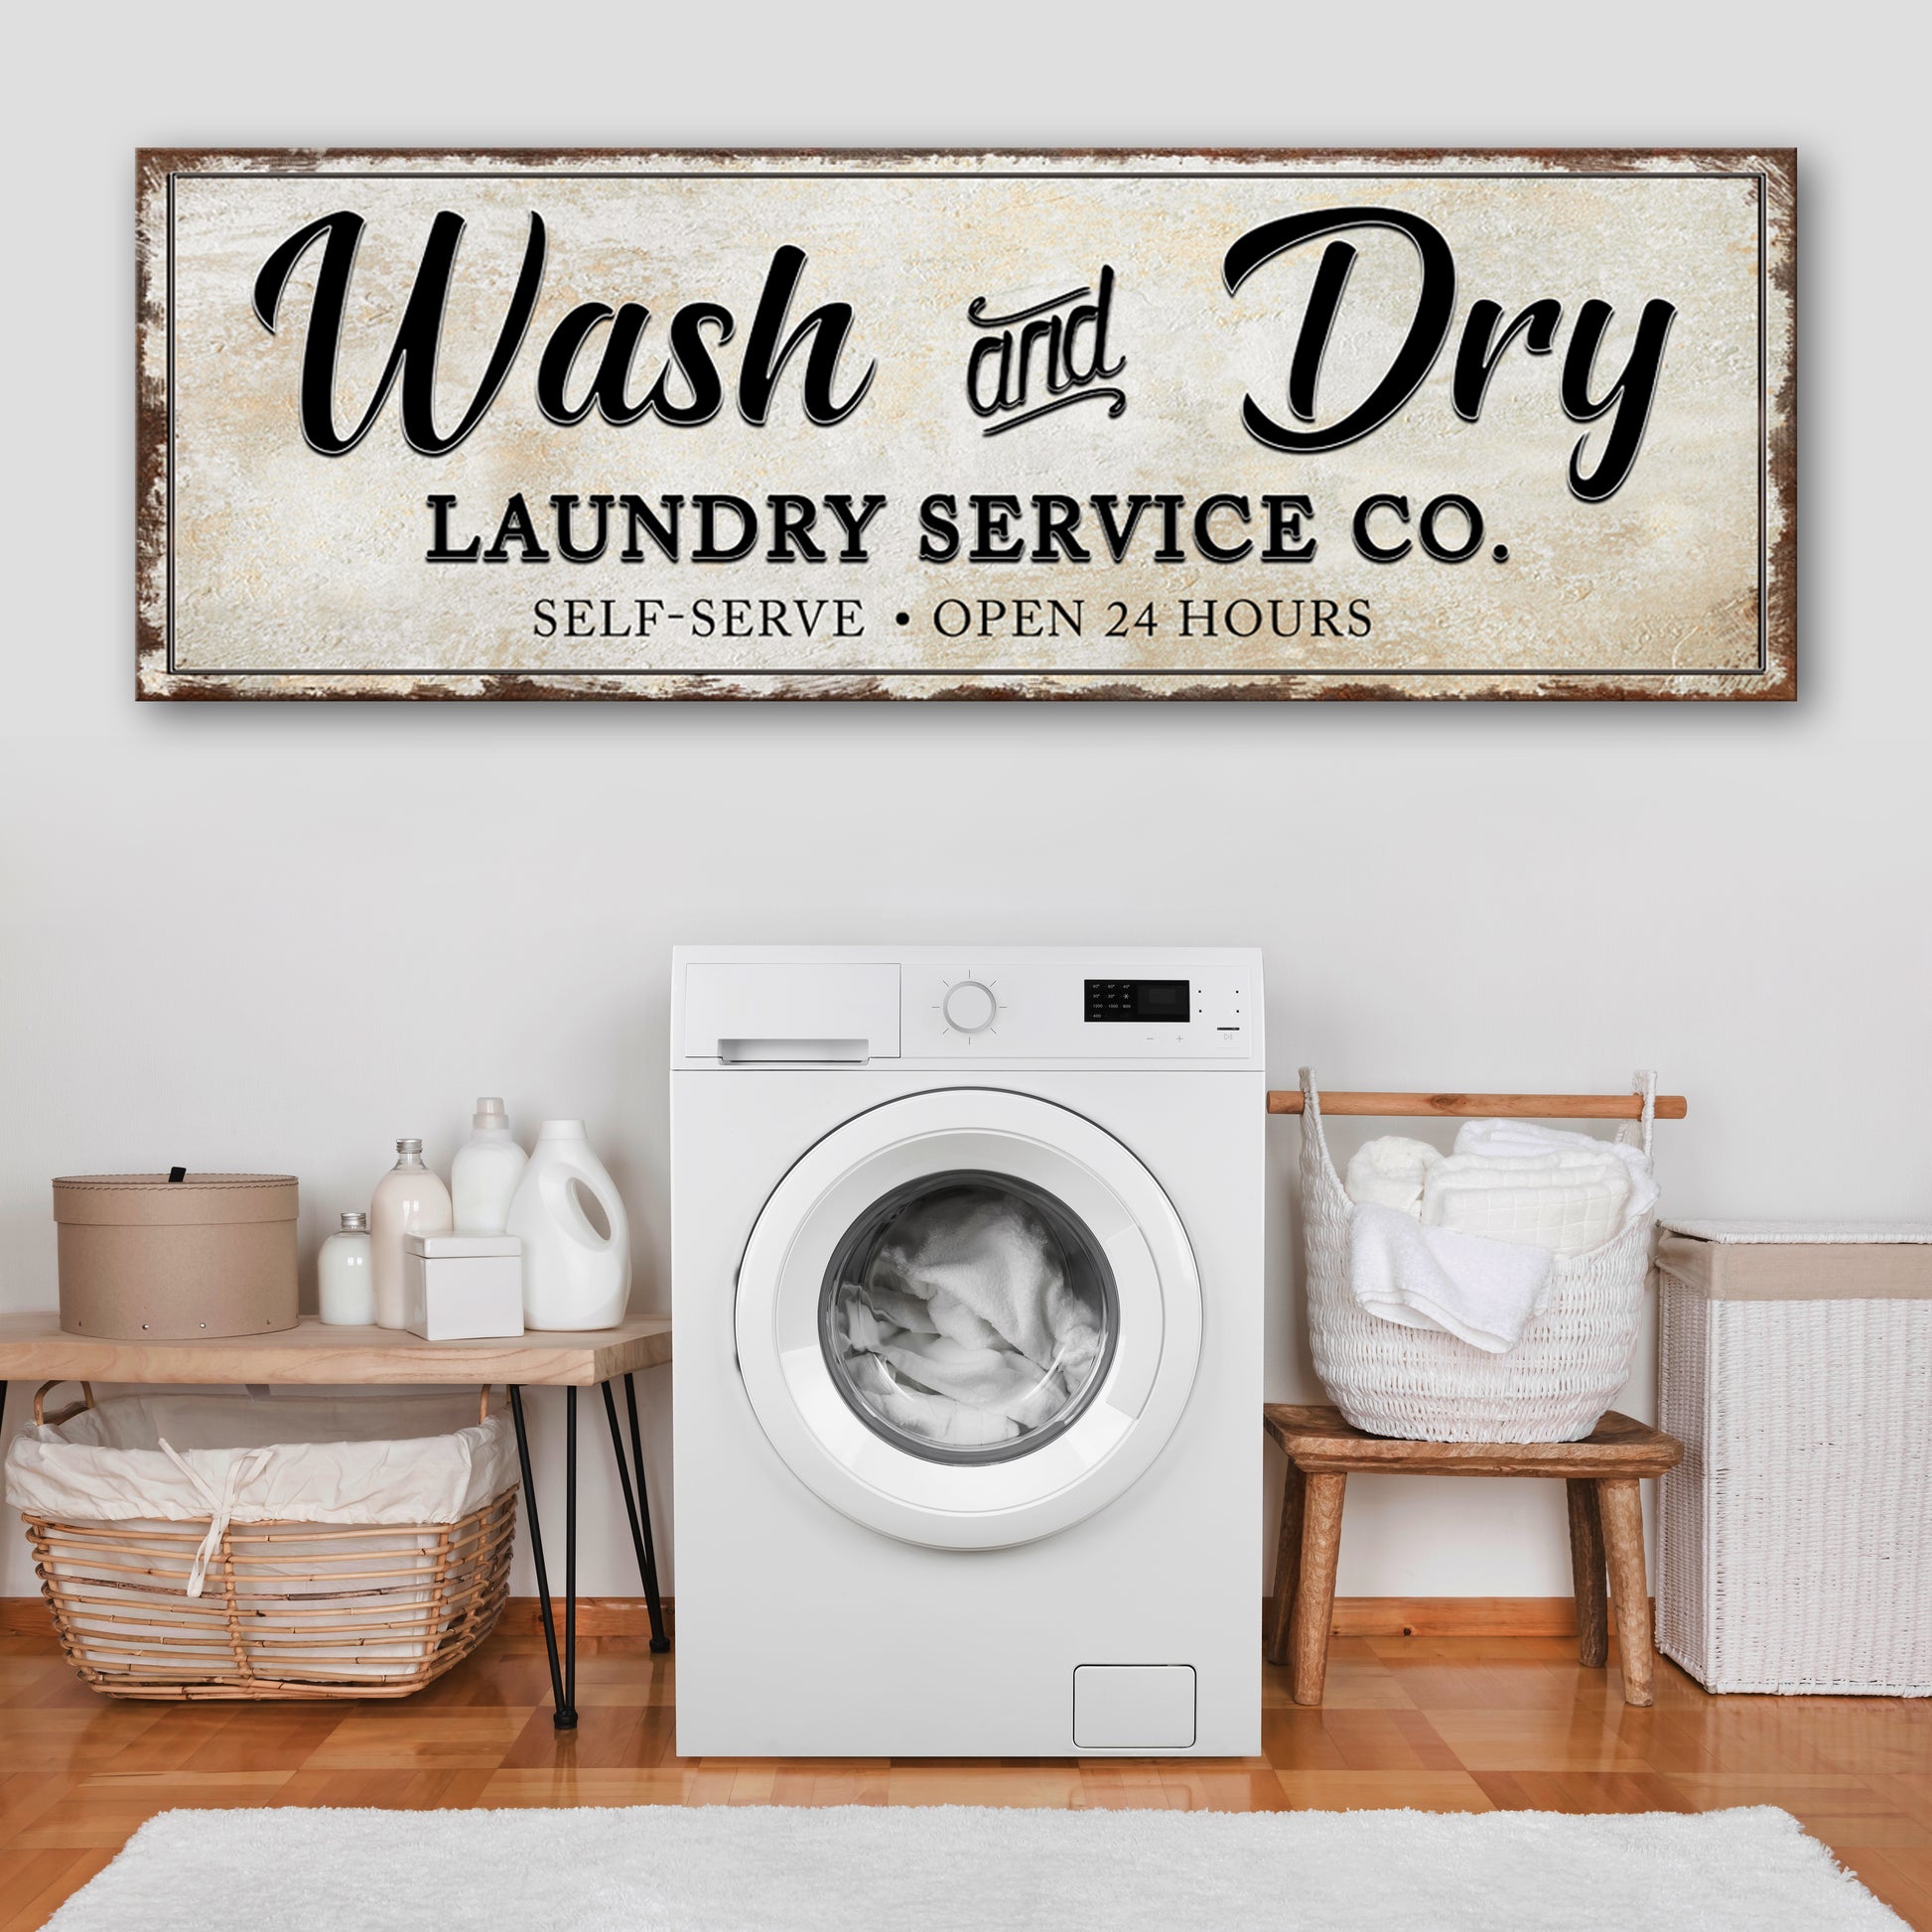 Wash and Dry Laundry Service Co Sign Style 2 - Image by Tailored Canvases